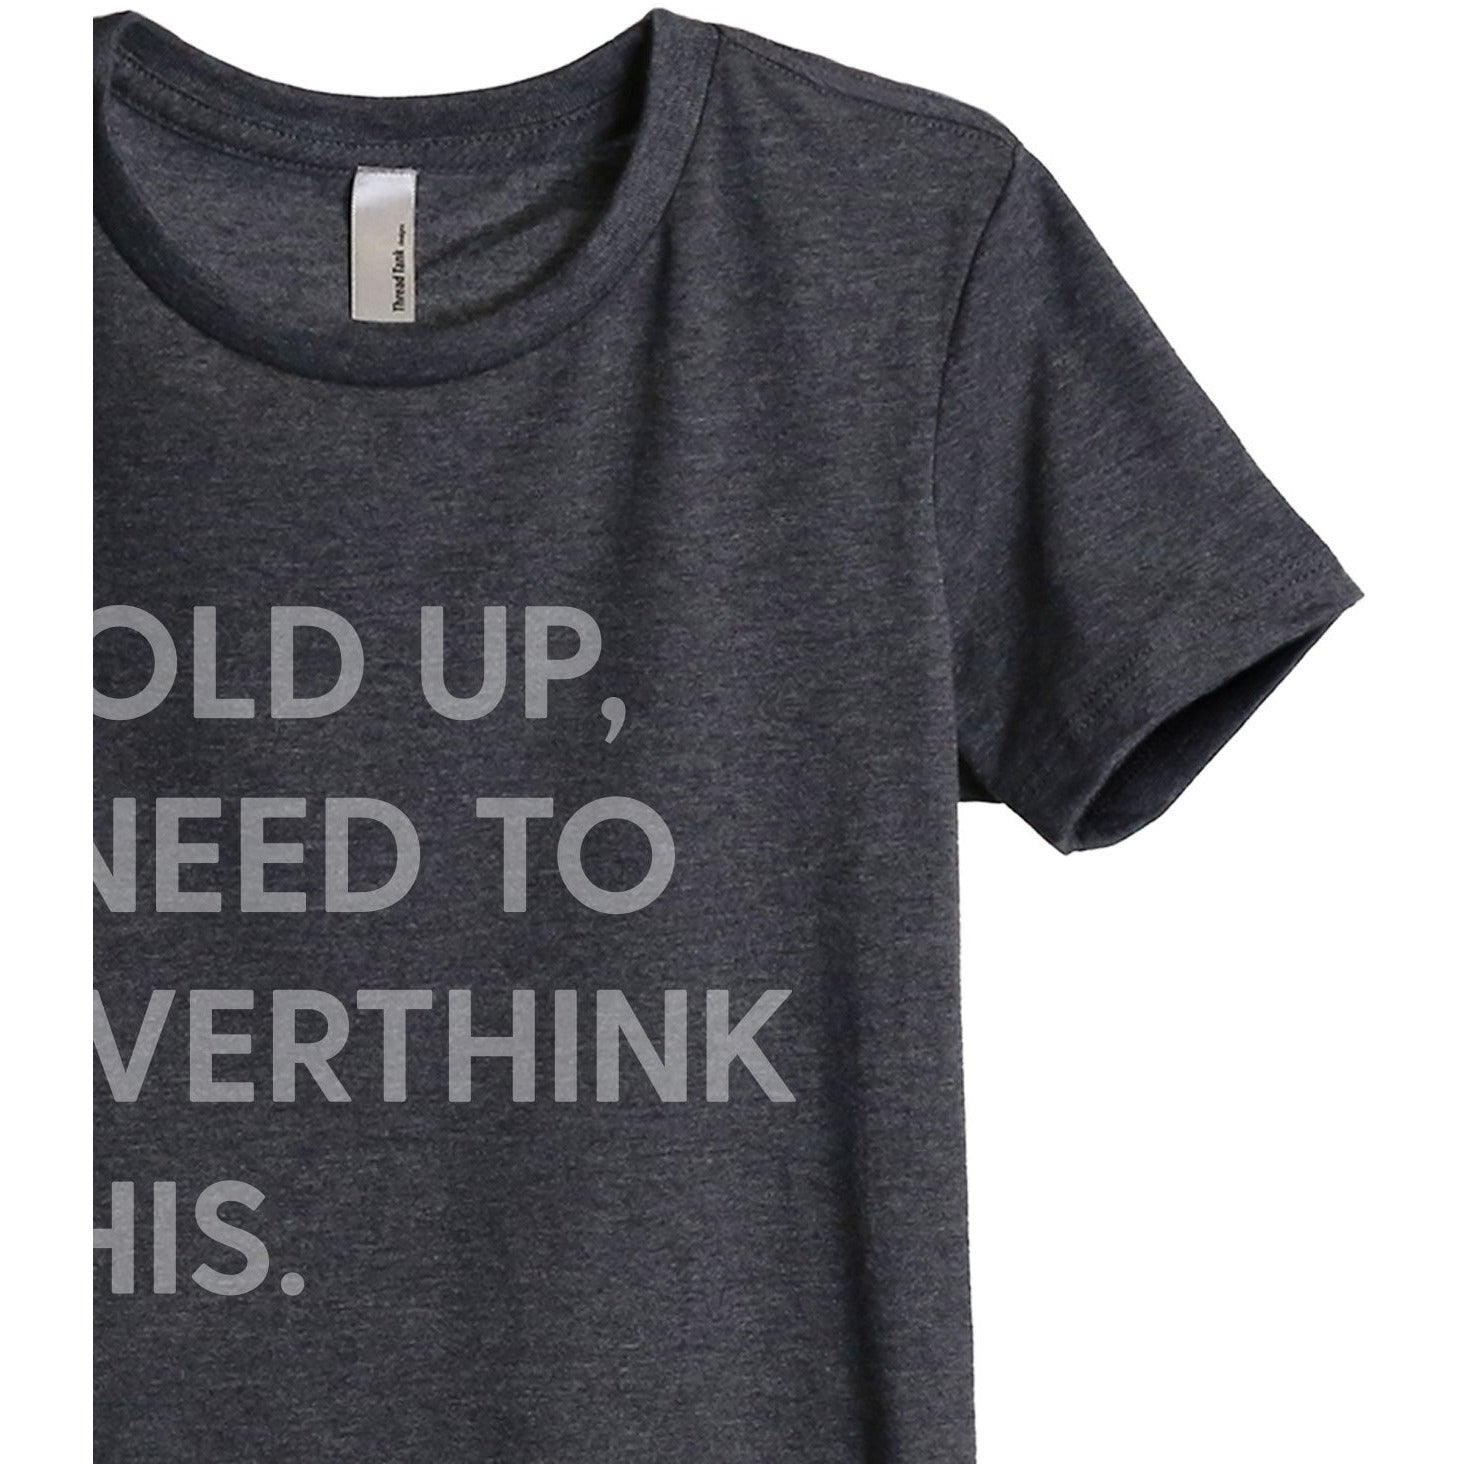 Hold Up, I Need To Rethink This Women's Relaxed Crewneck T-Shirt Top Tee Charcoal Grey Zoom Details